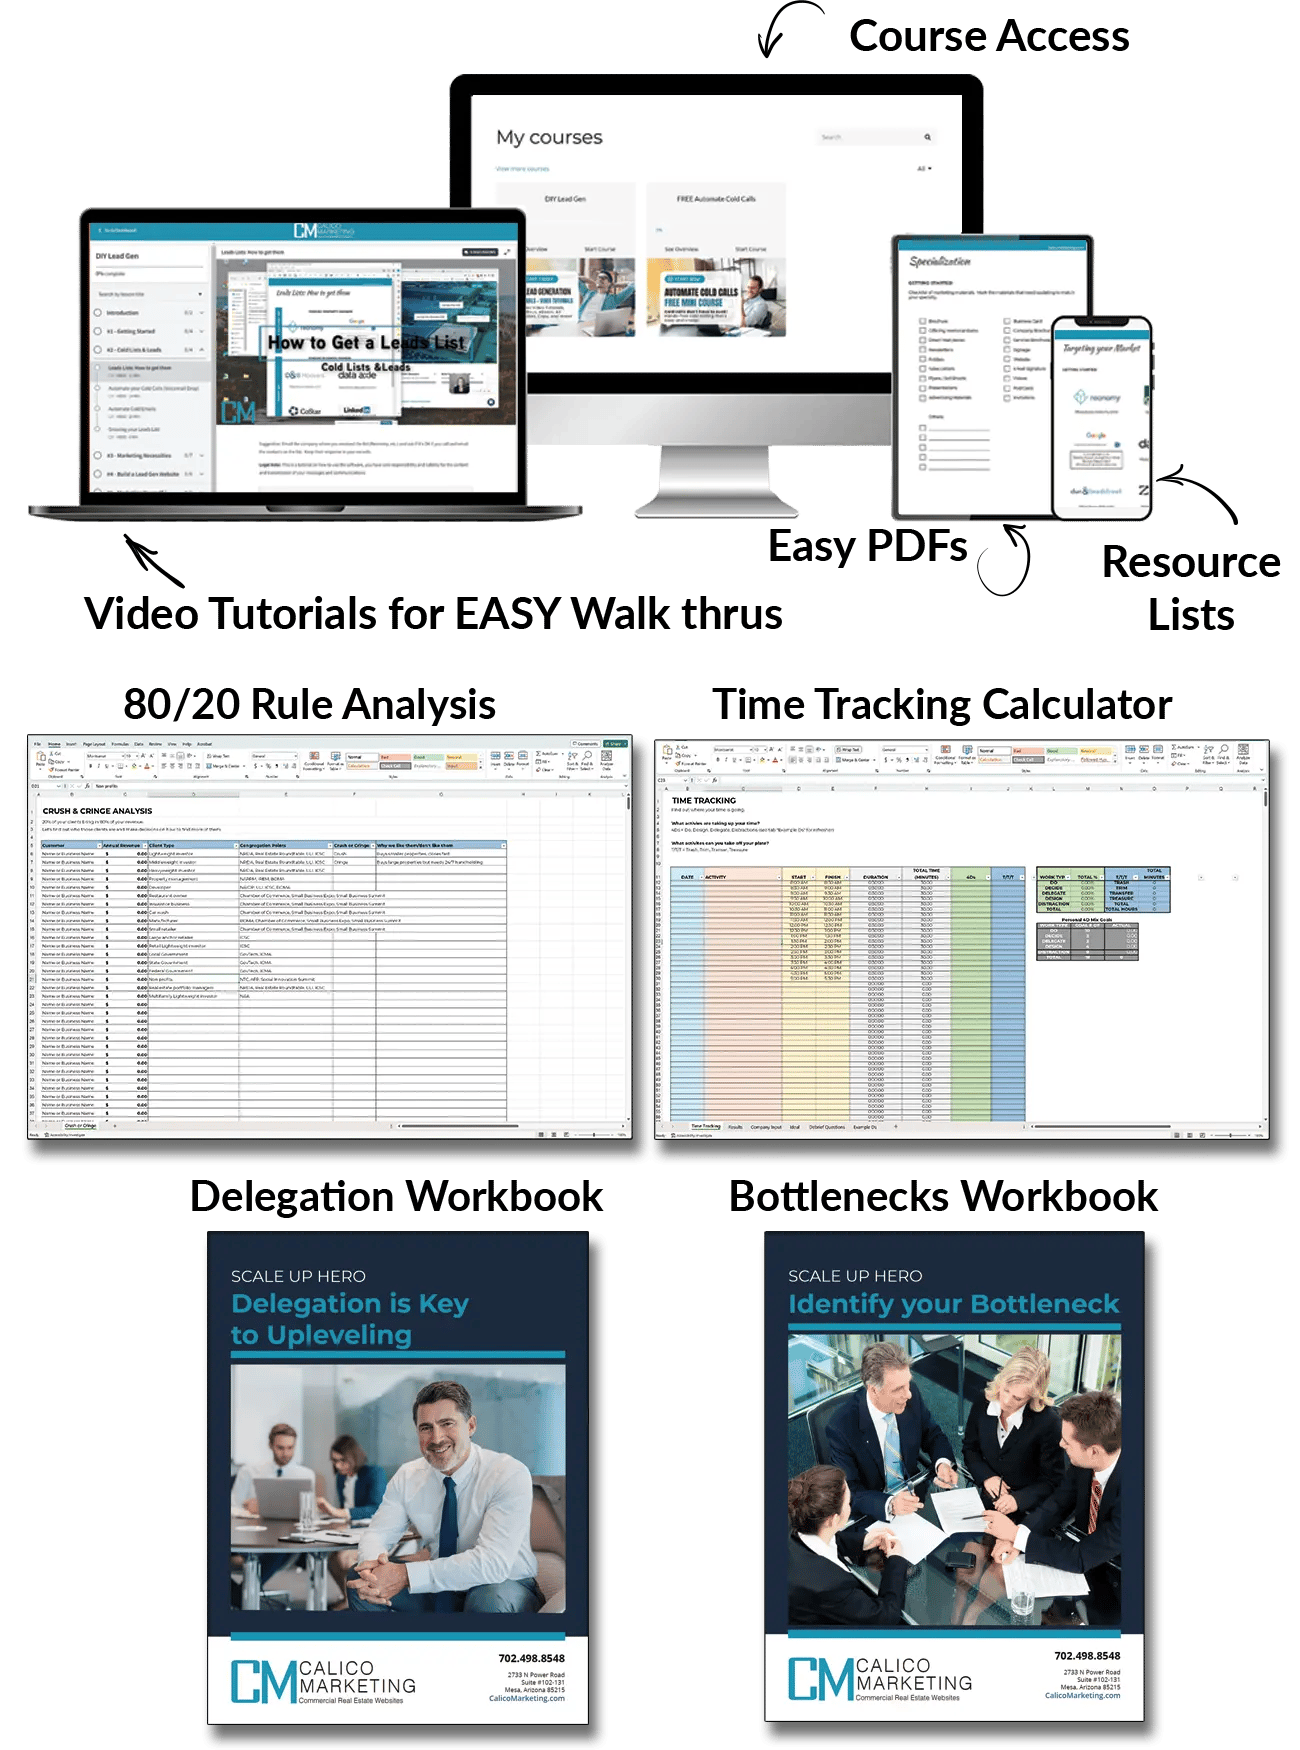 Mockup of materials included in the Scale Up Hero Package. Shows the video tutorials, easy PDF downloads, spread sheet of the 80-20 rule, time tracking calculator, delegation workbook and bottlenecks workbook.